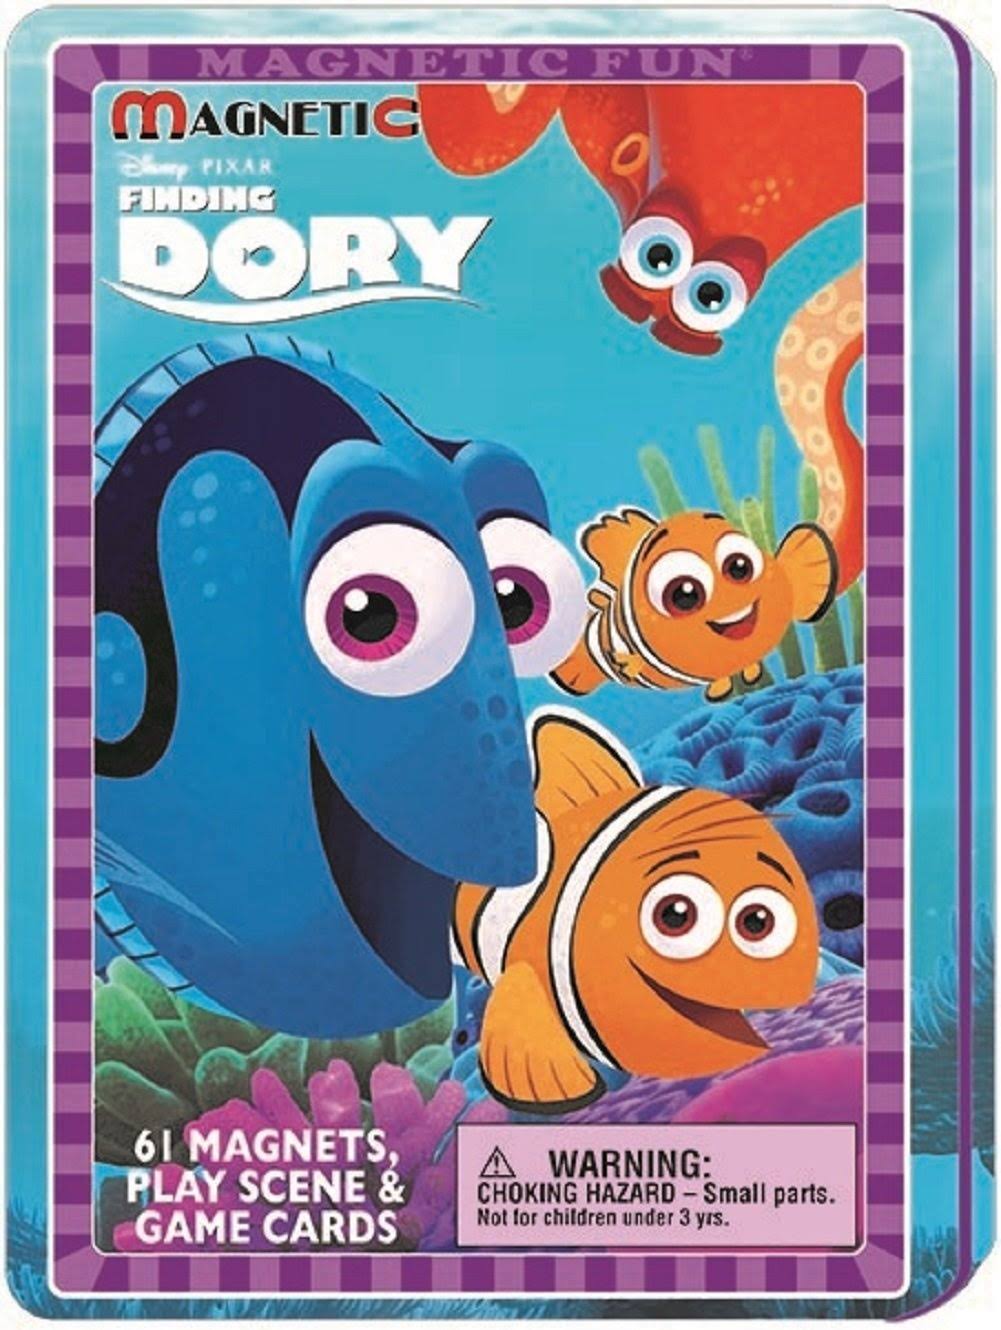 Lee Publications Finding Dory Magnetic Fun Puzzle Set - 61 Magnets Play Scene & Game Cards